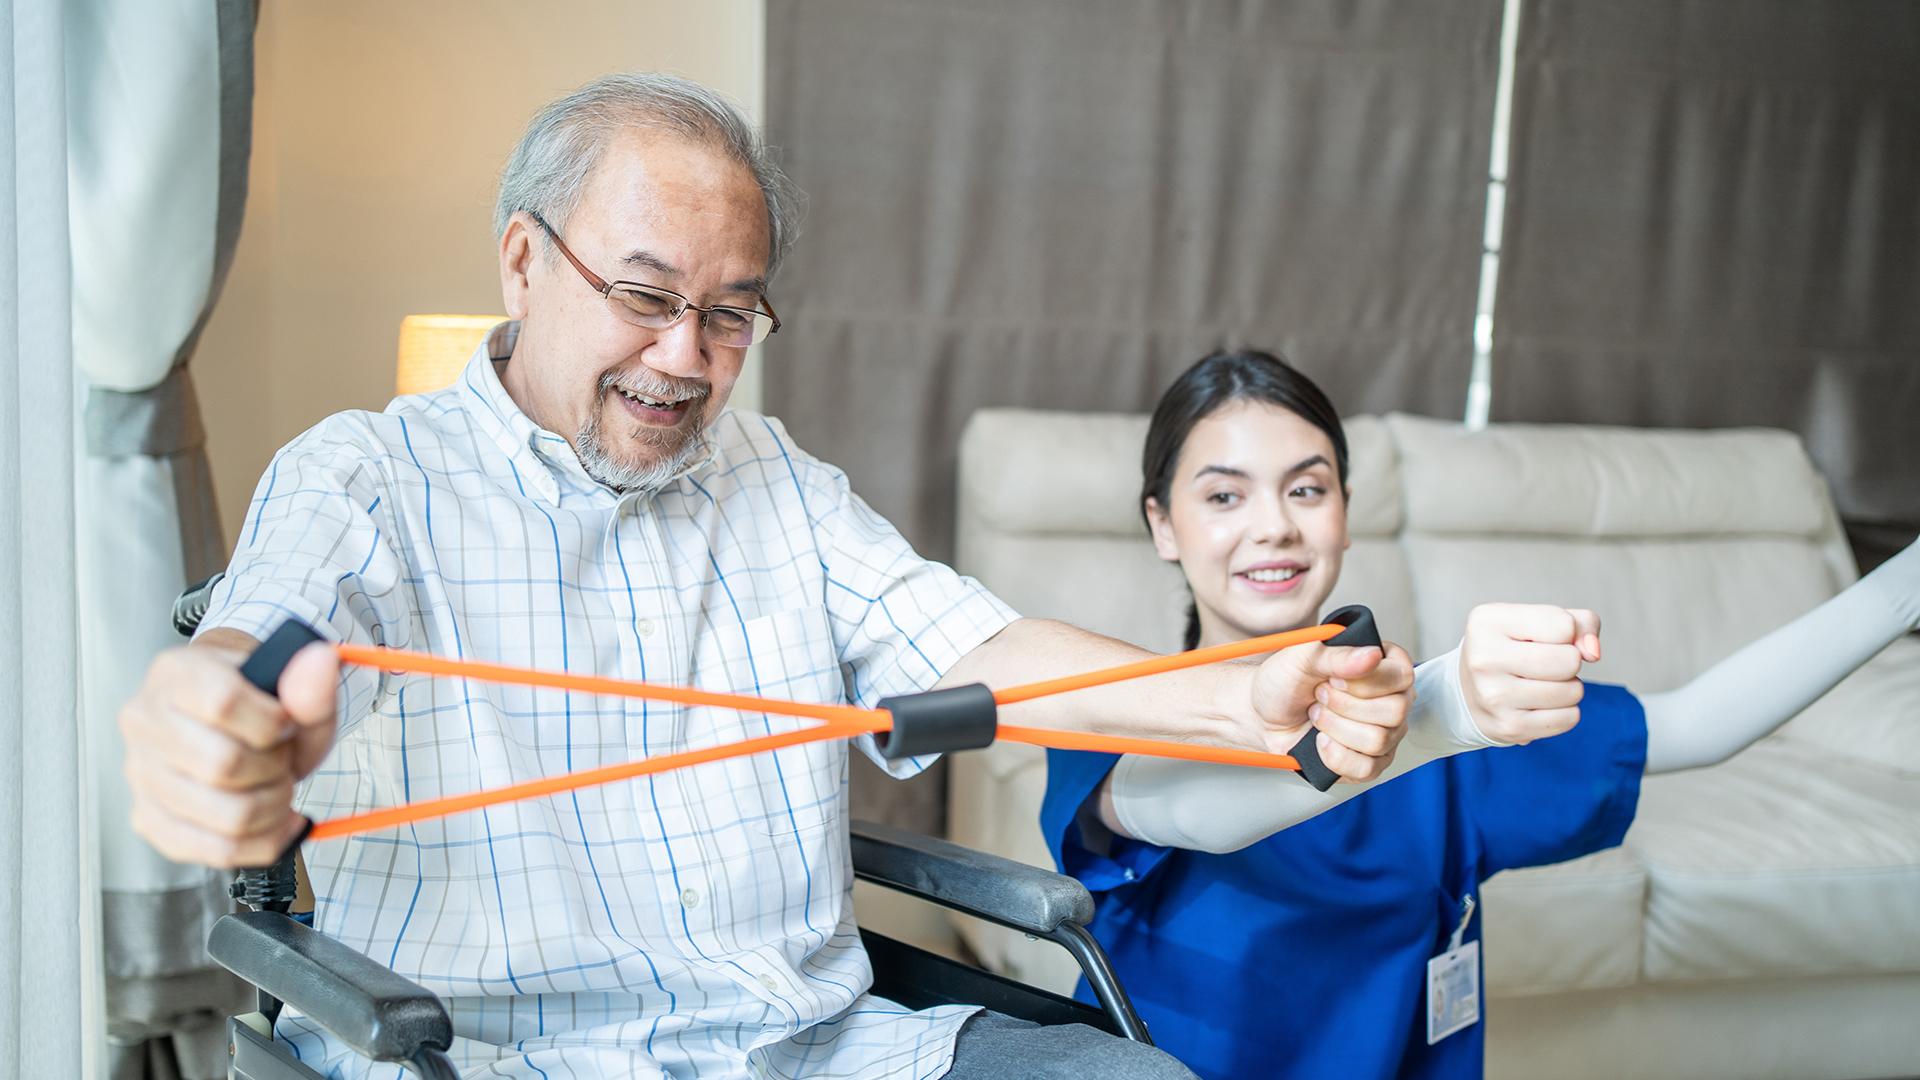 An older man working with a Physical Therapist.